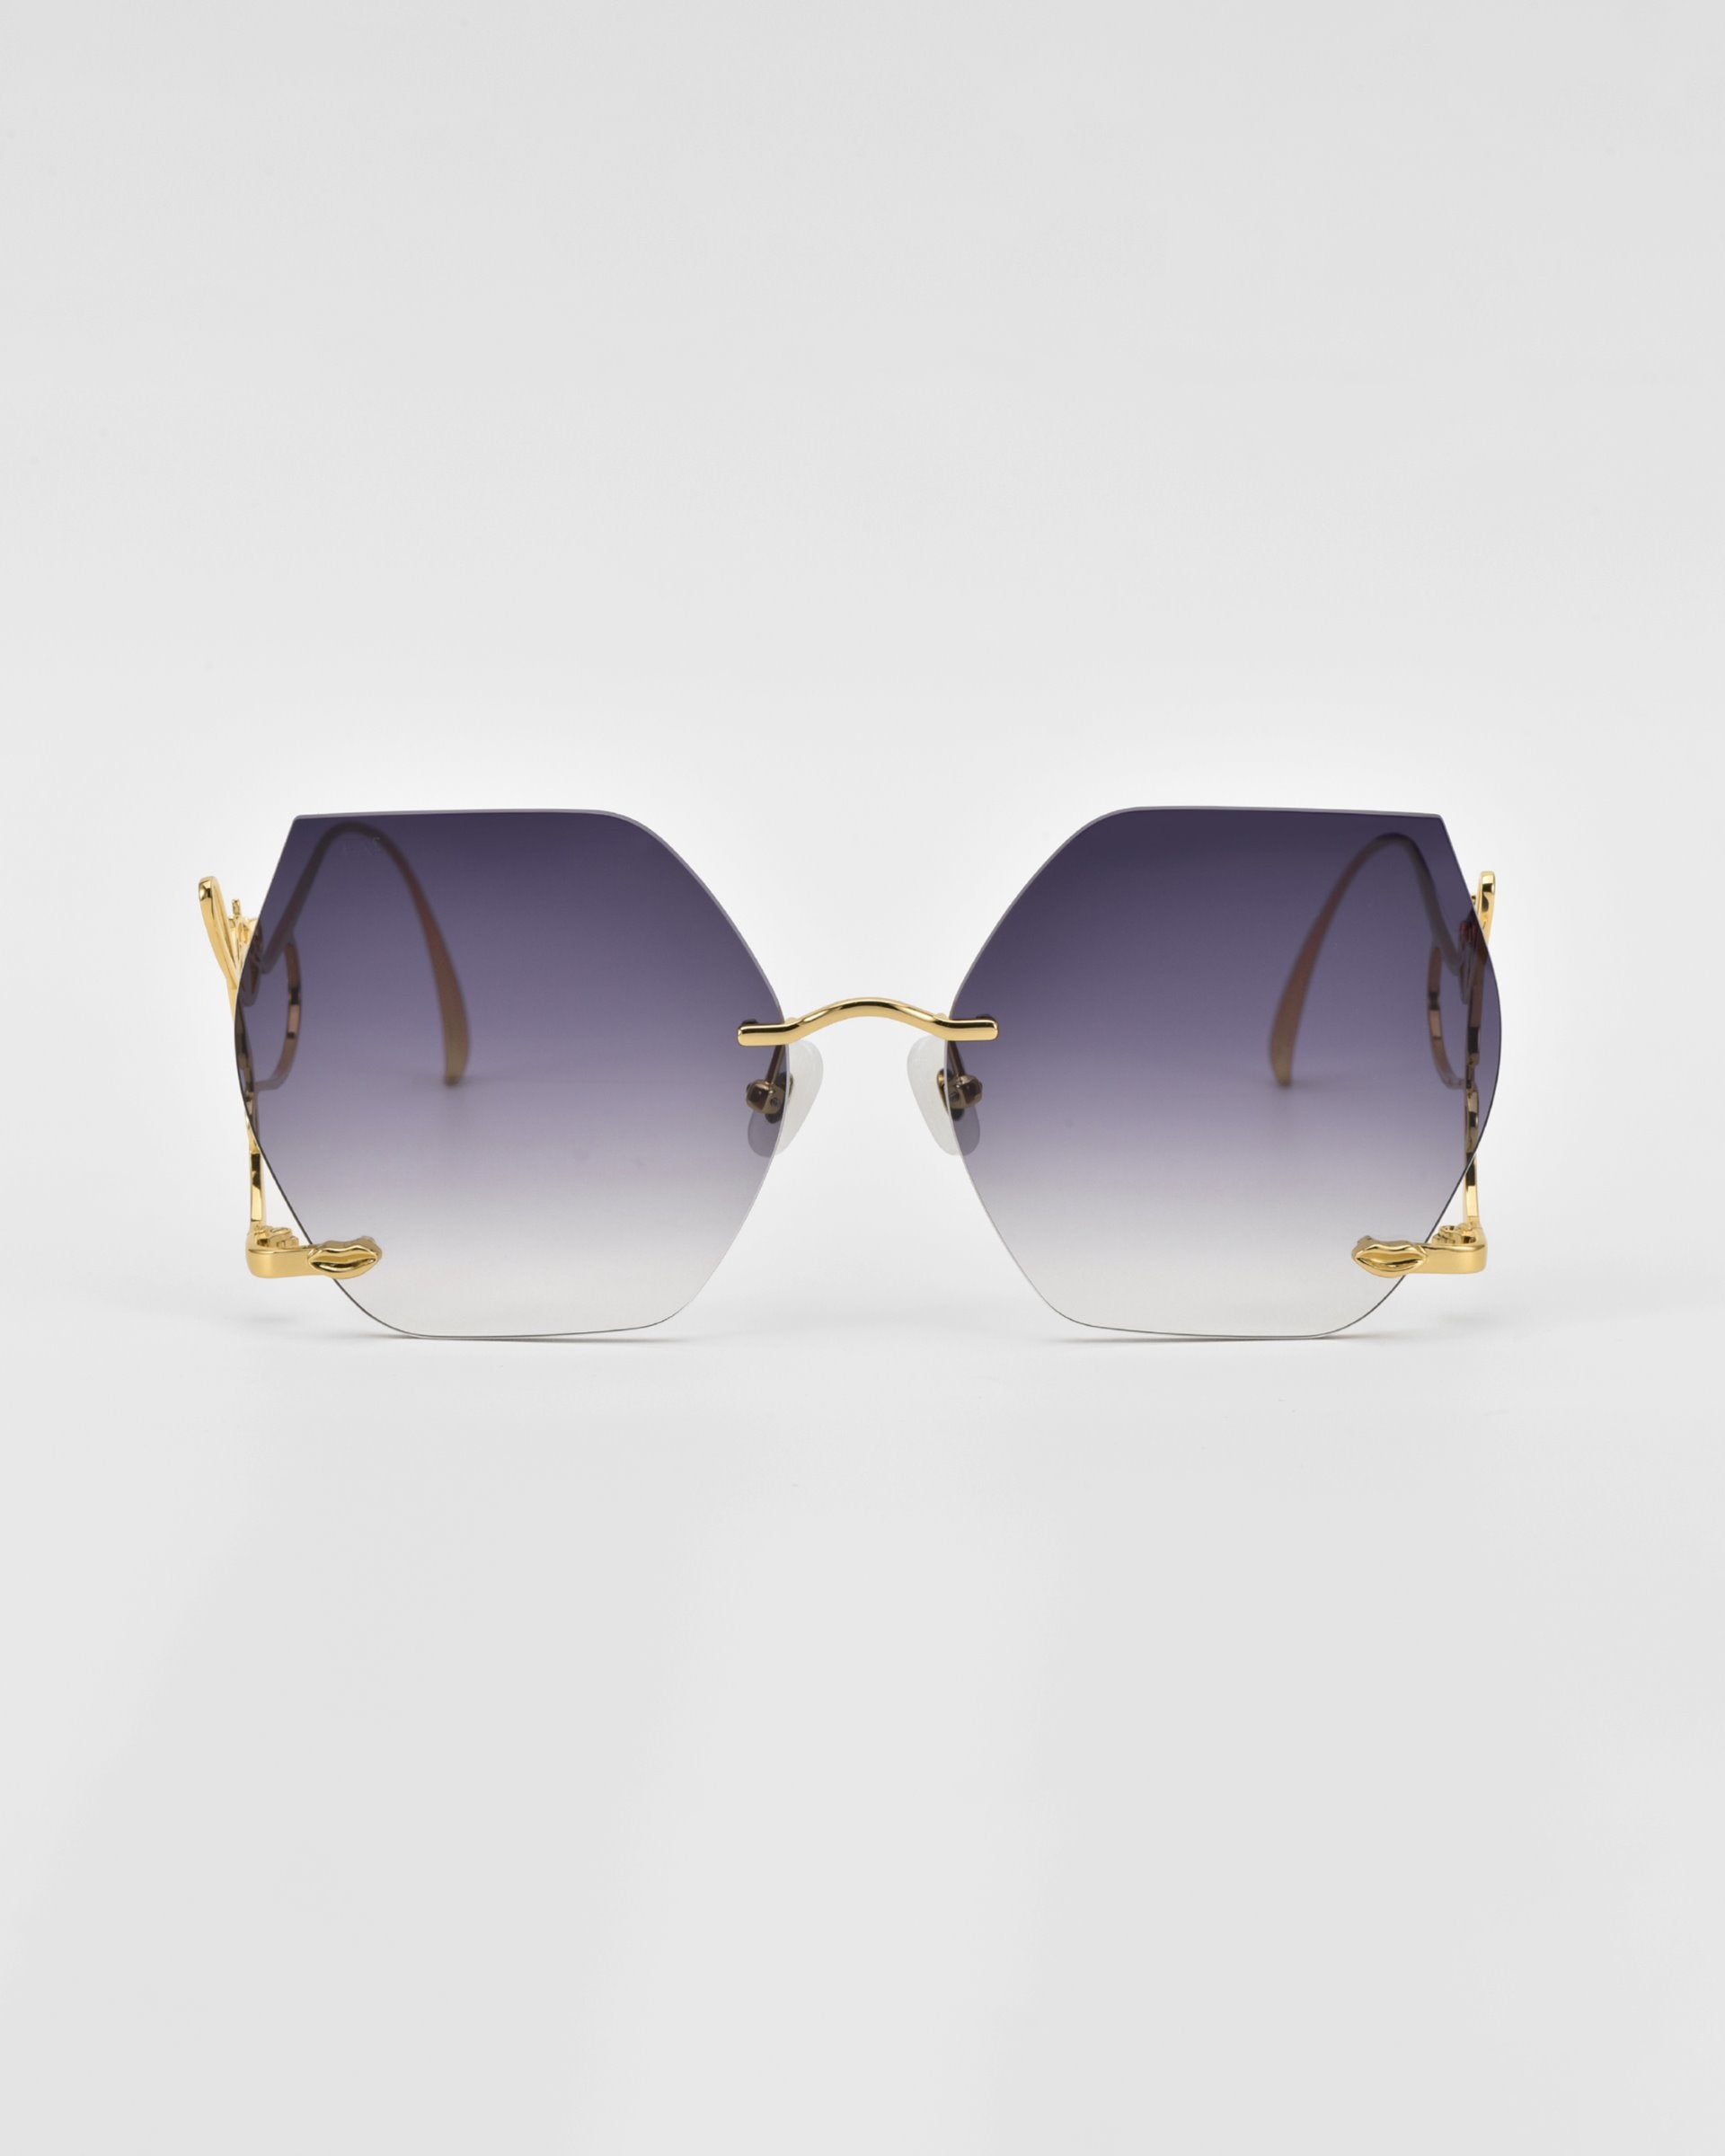 A pair of Cry Me a River sunglasses from For Art's Sake® with gradient hexagonal lenses, transitioning from dark purple to lighter shades at the bottom, featuring thin gold frames and temples, lying flat against a plain white background. These limited edition sunglasses are truly one-of-a-kind.